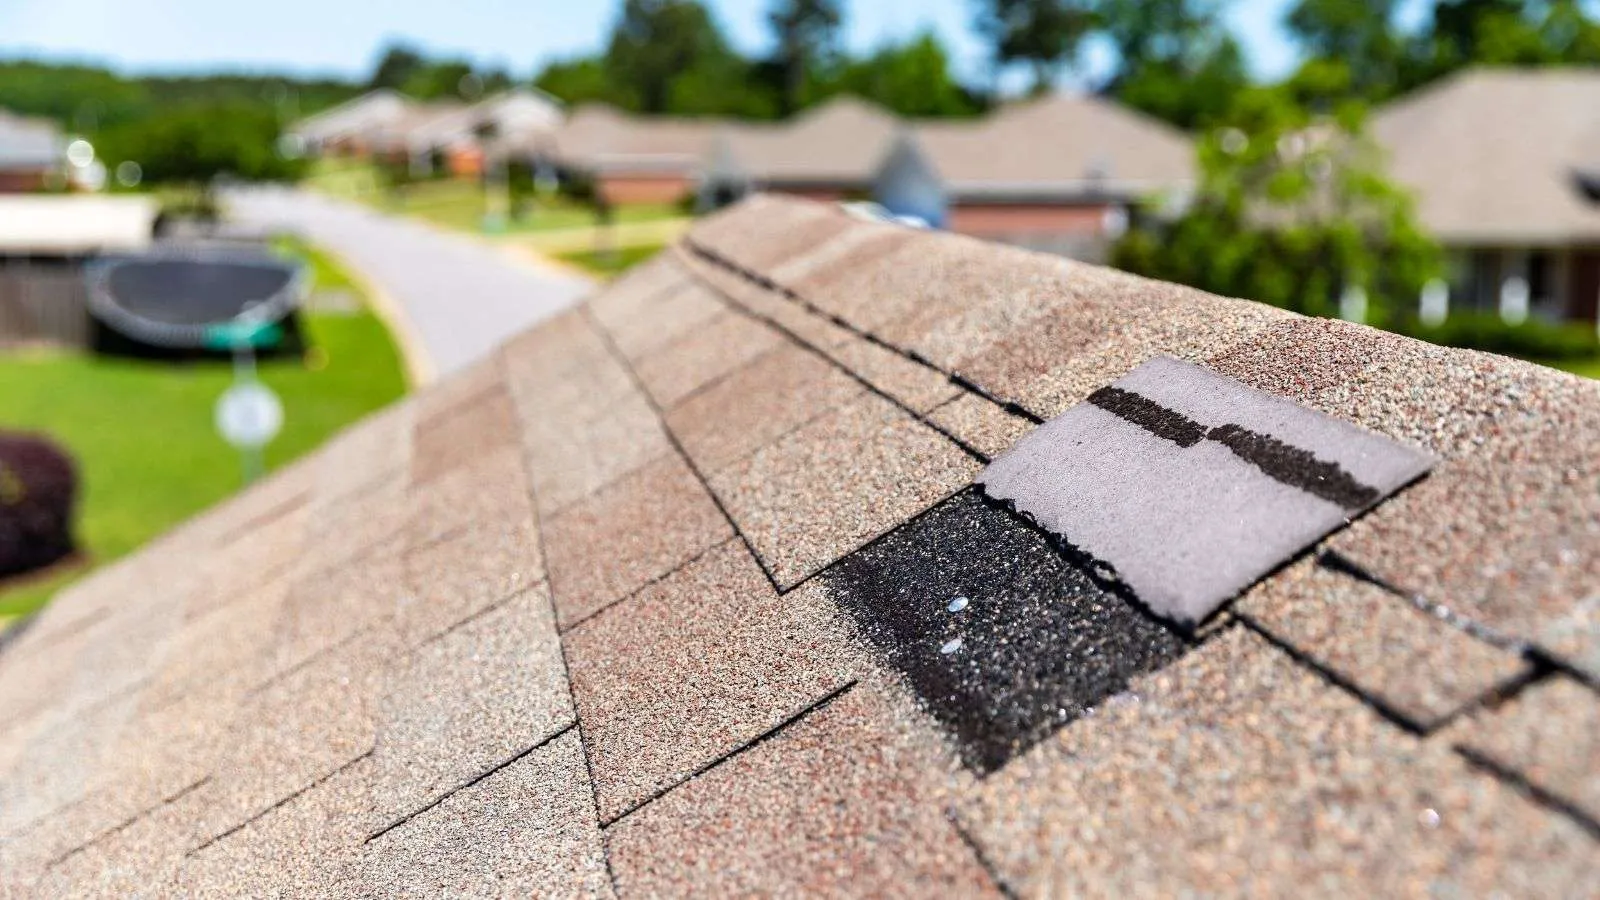 how strong does wind have to be to damage roof shingles - bighomeprojects.com